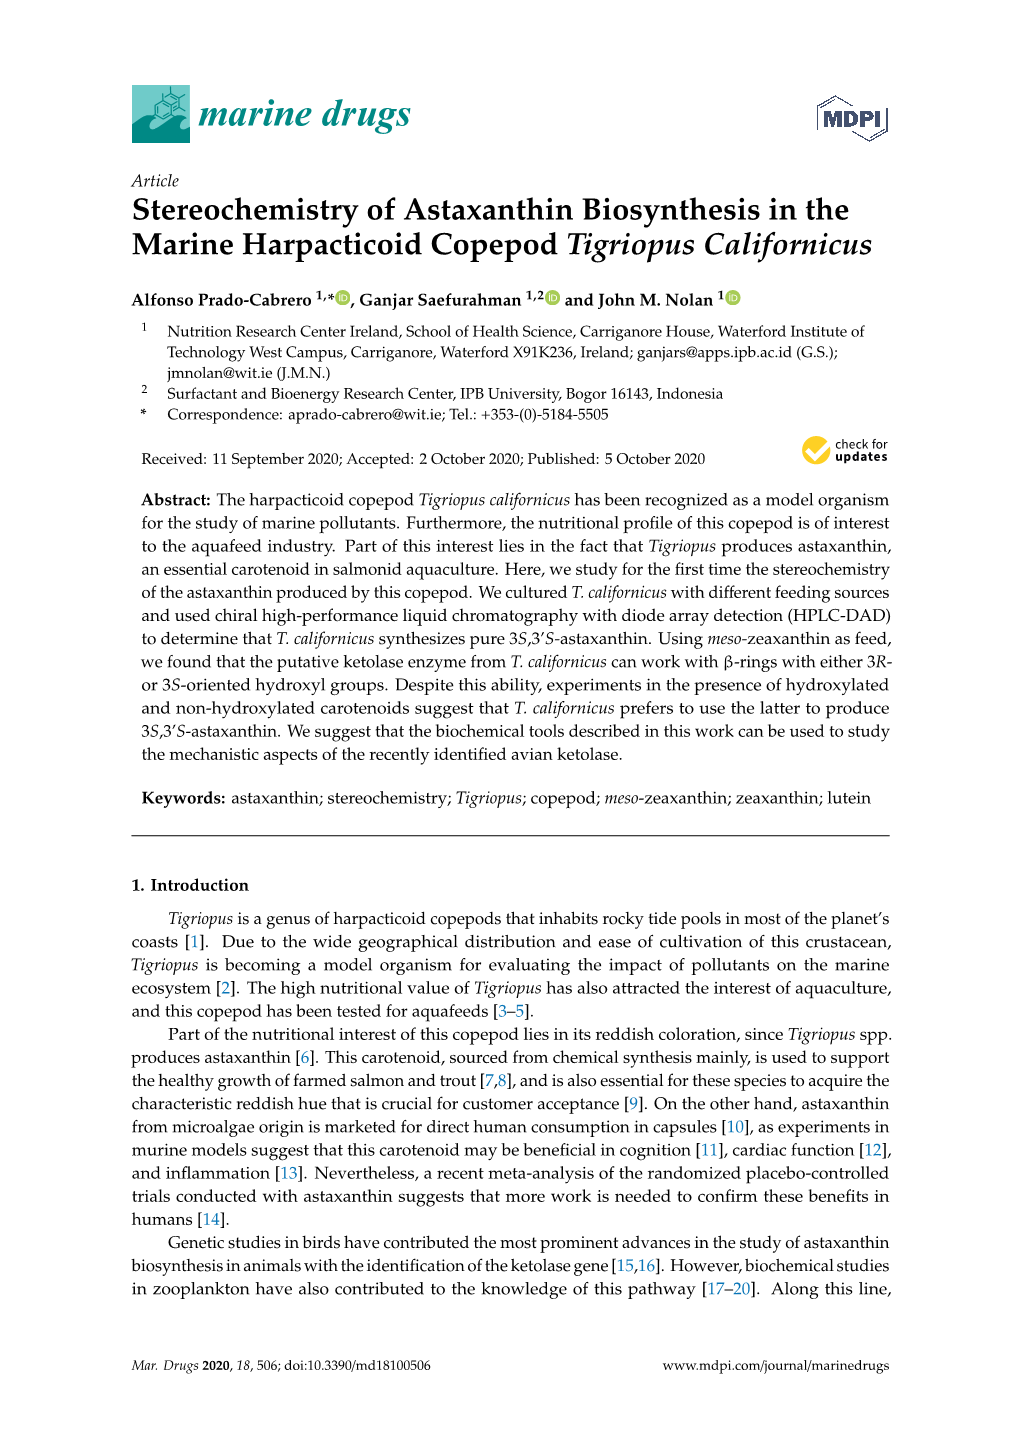 Stereochemistry of Astaxanthin Biosynthesis in the Marine Harpacticoid Copepod Tigriopus Californicus